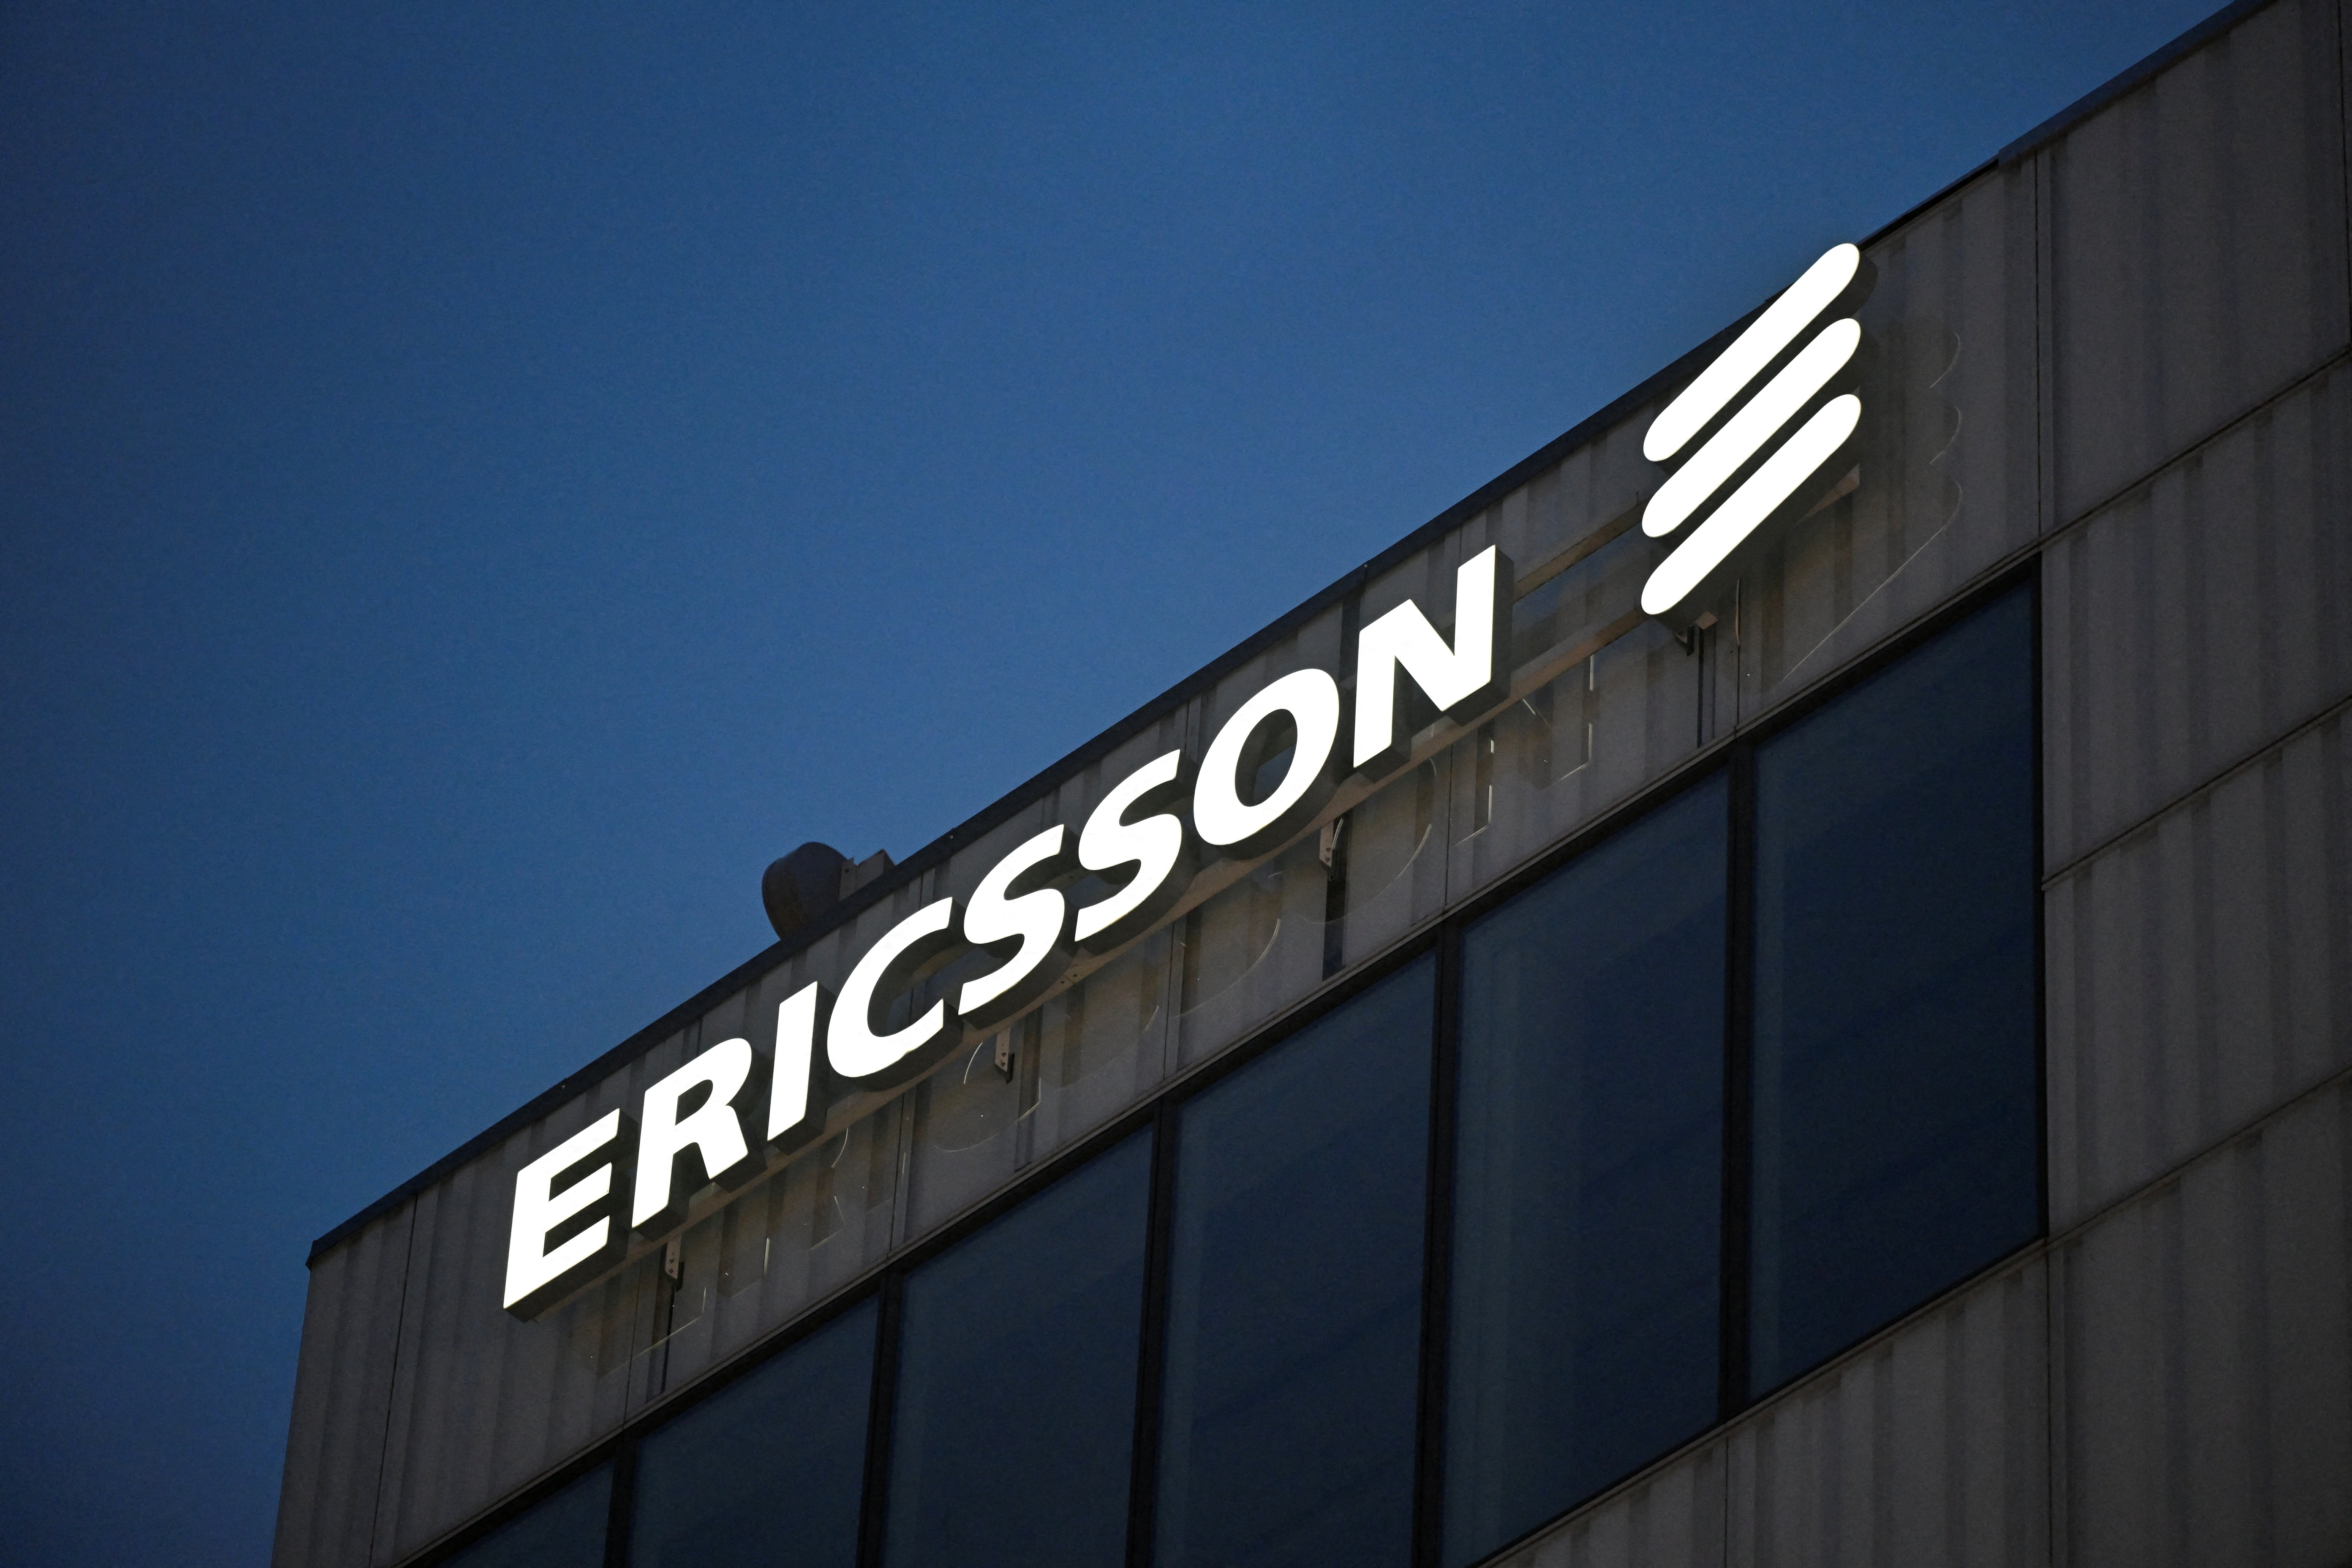 Ericsson logo is displayed on the company's headquarters building in Stockholm